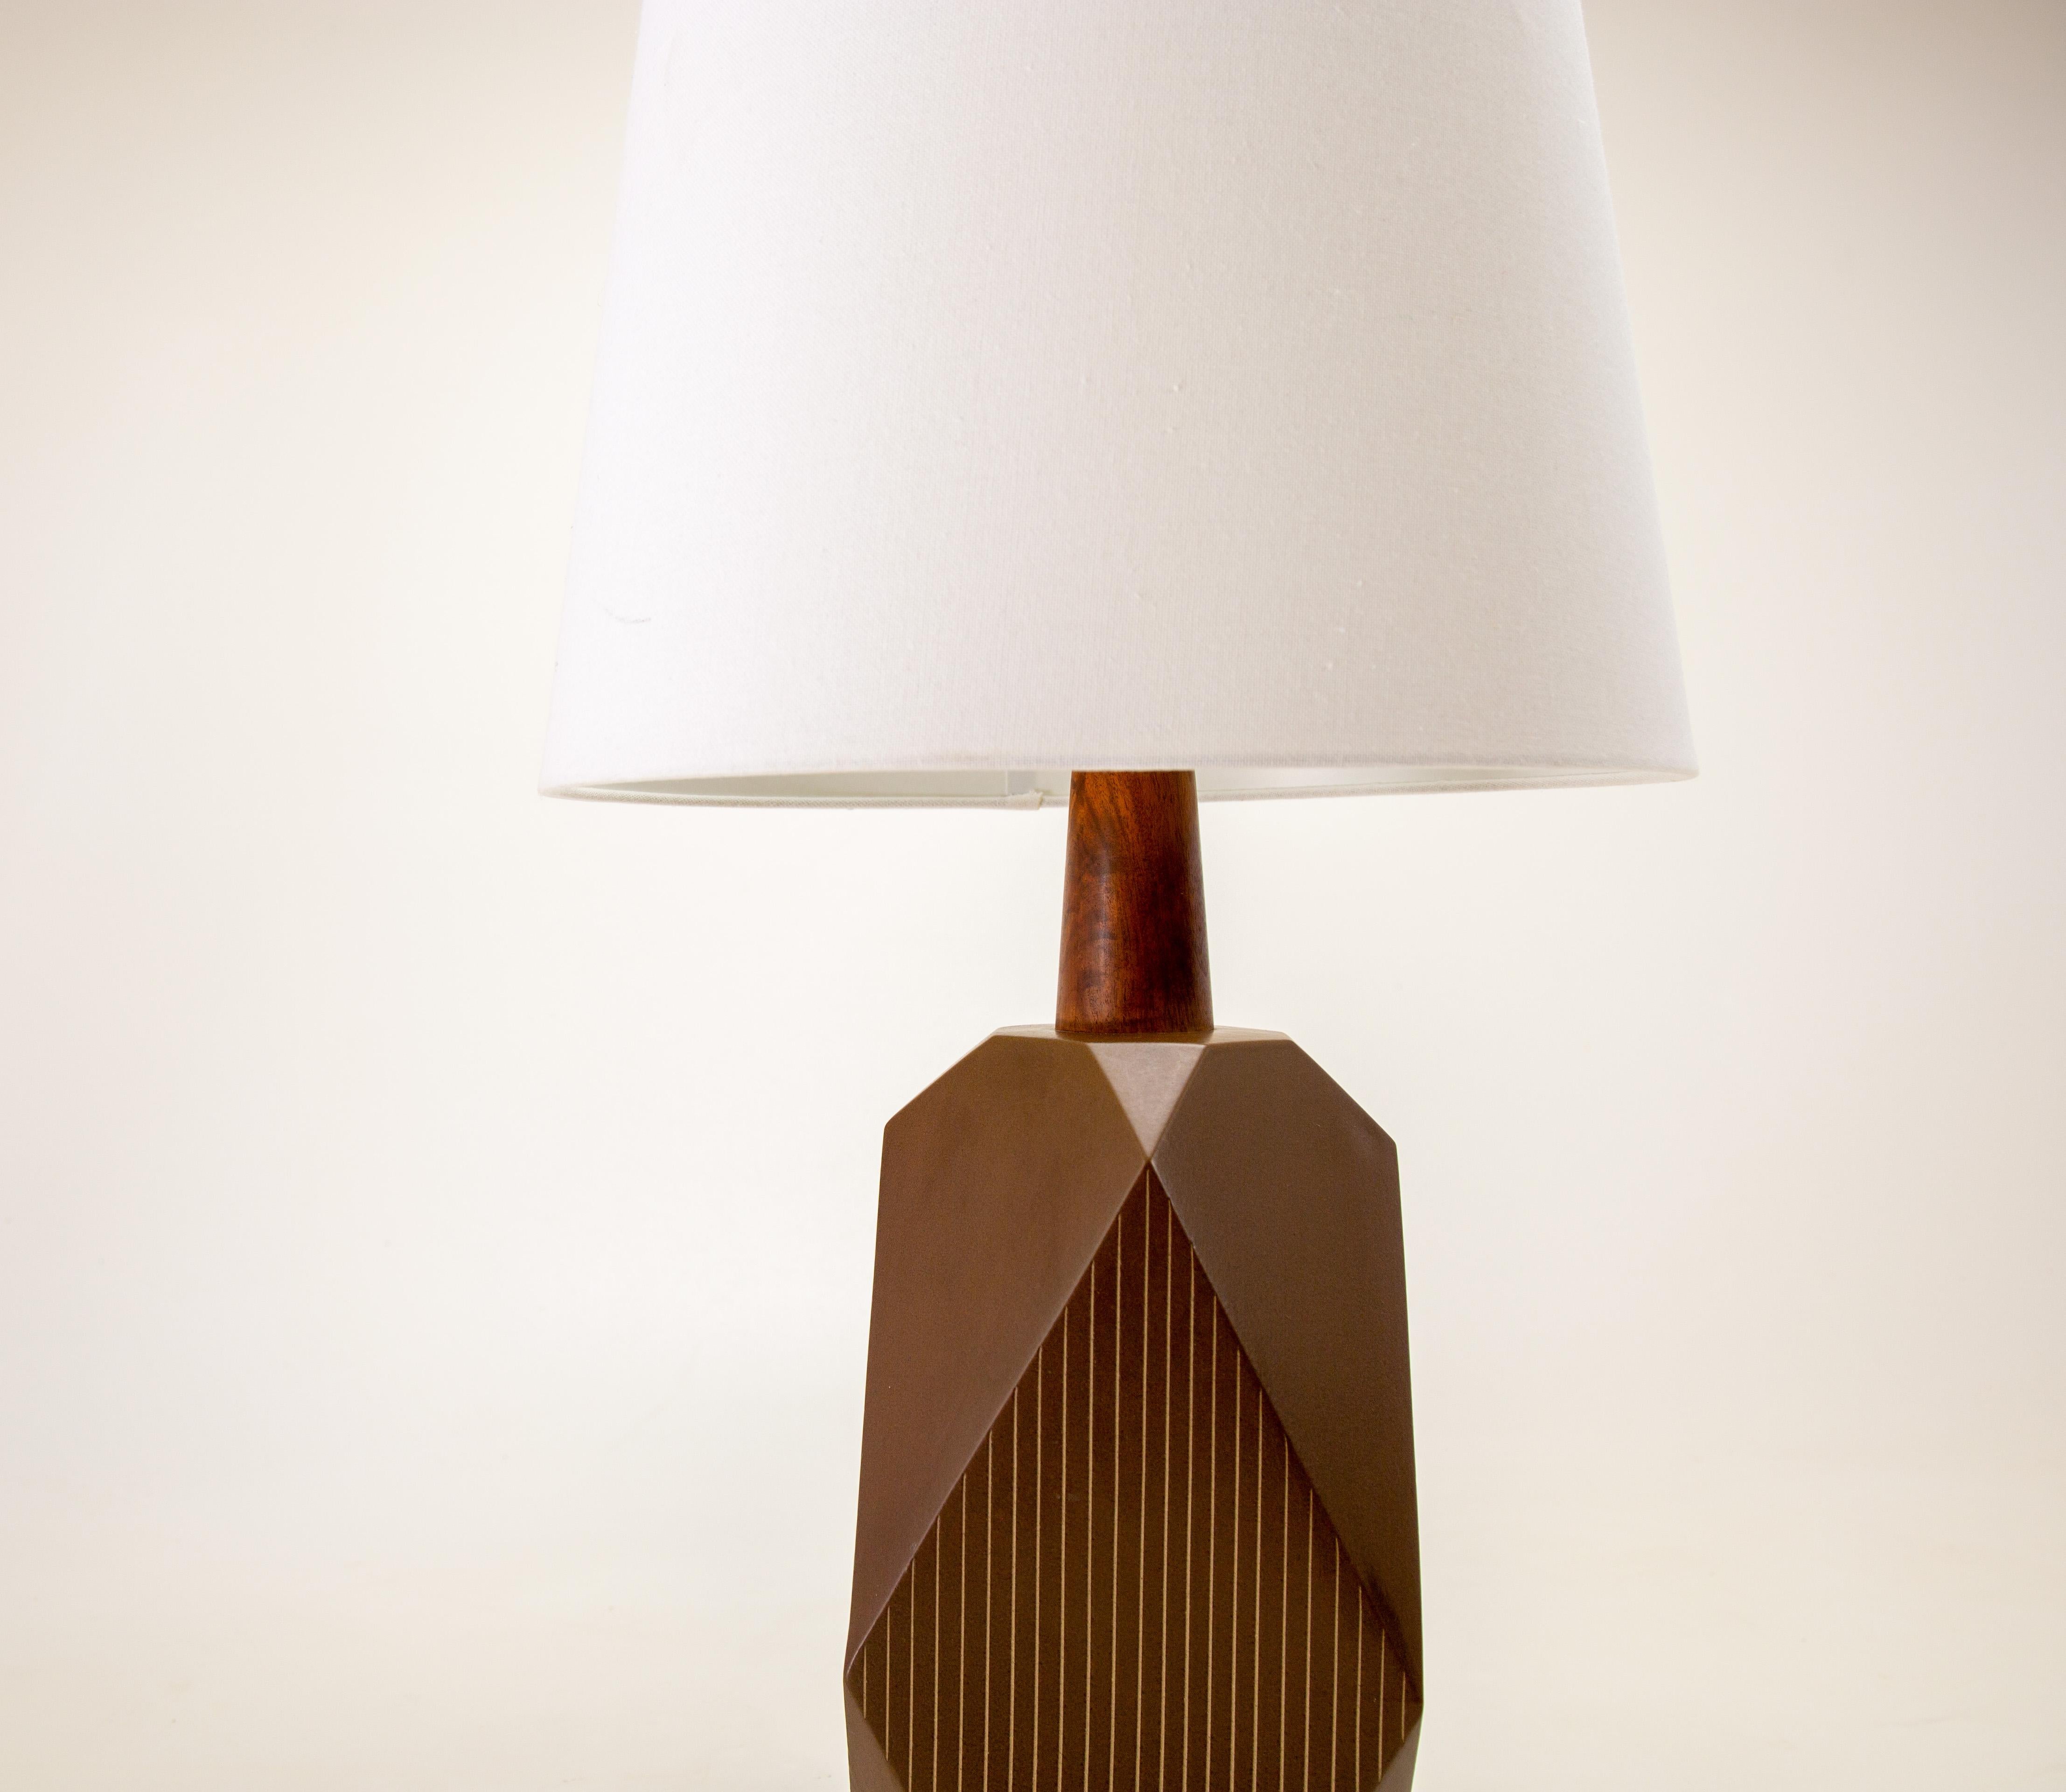 Gordon and Jane Martz M245 Lamp for Marshall Studios large geometric form In Good Condition For Sale In Virginia Beach, VA